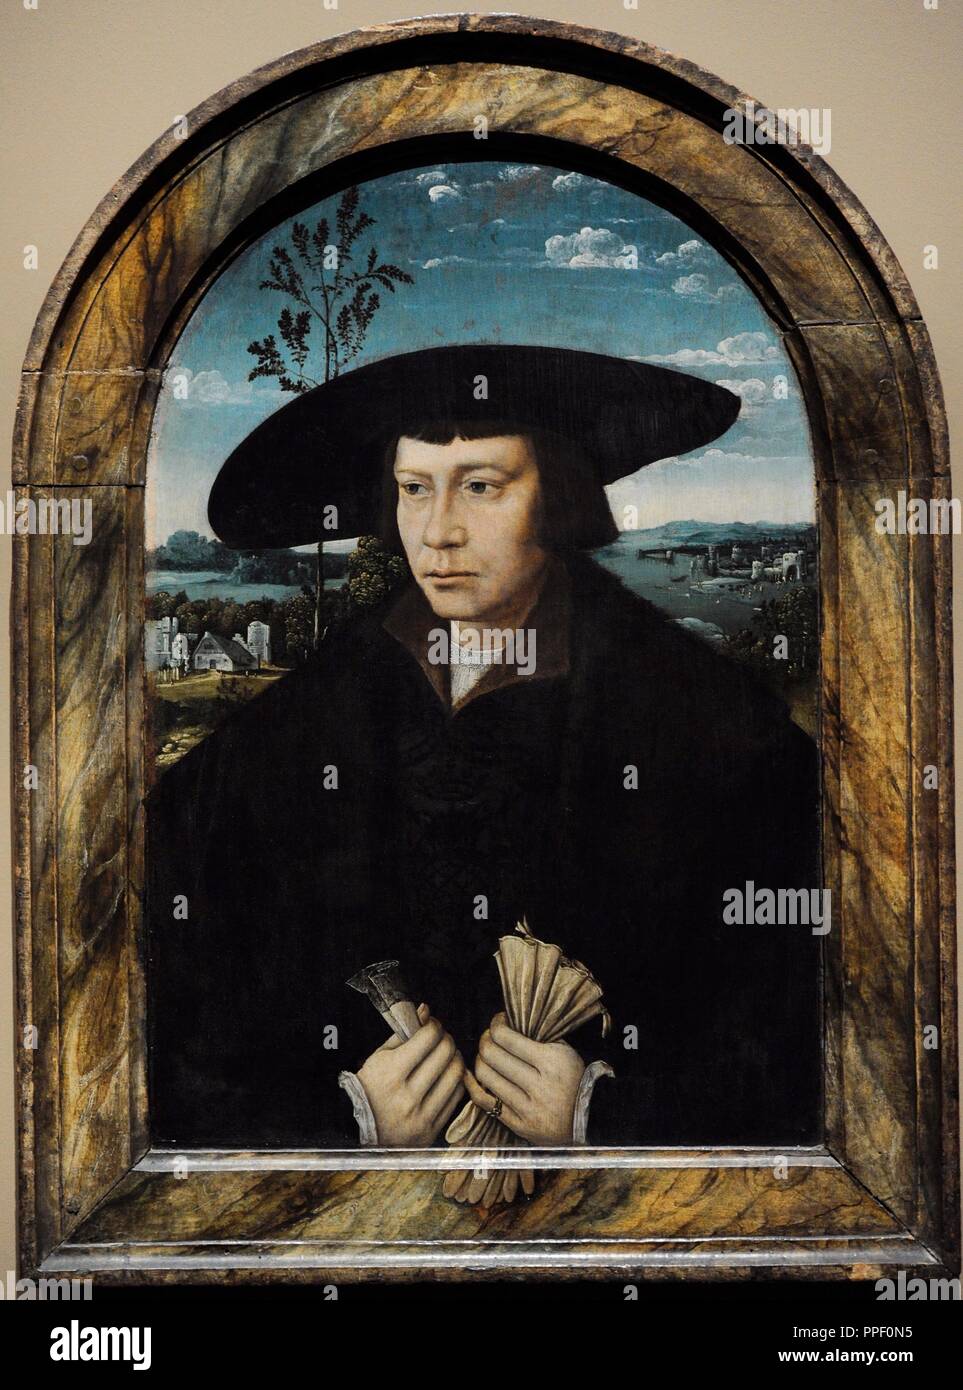 Holland, 16th century. Portrait of a man, 1520. Wallraf-Richartz Museum. Cologne. Germany. Stock Photo